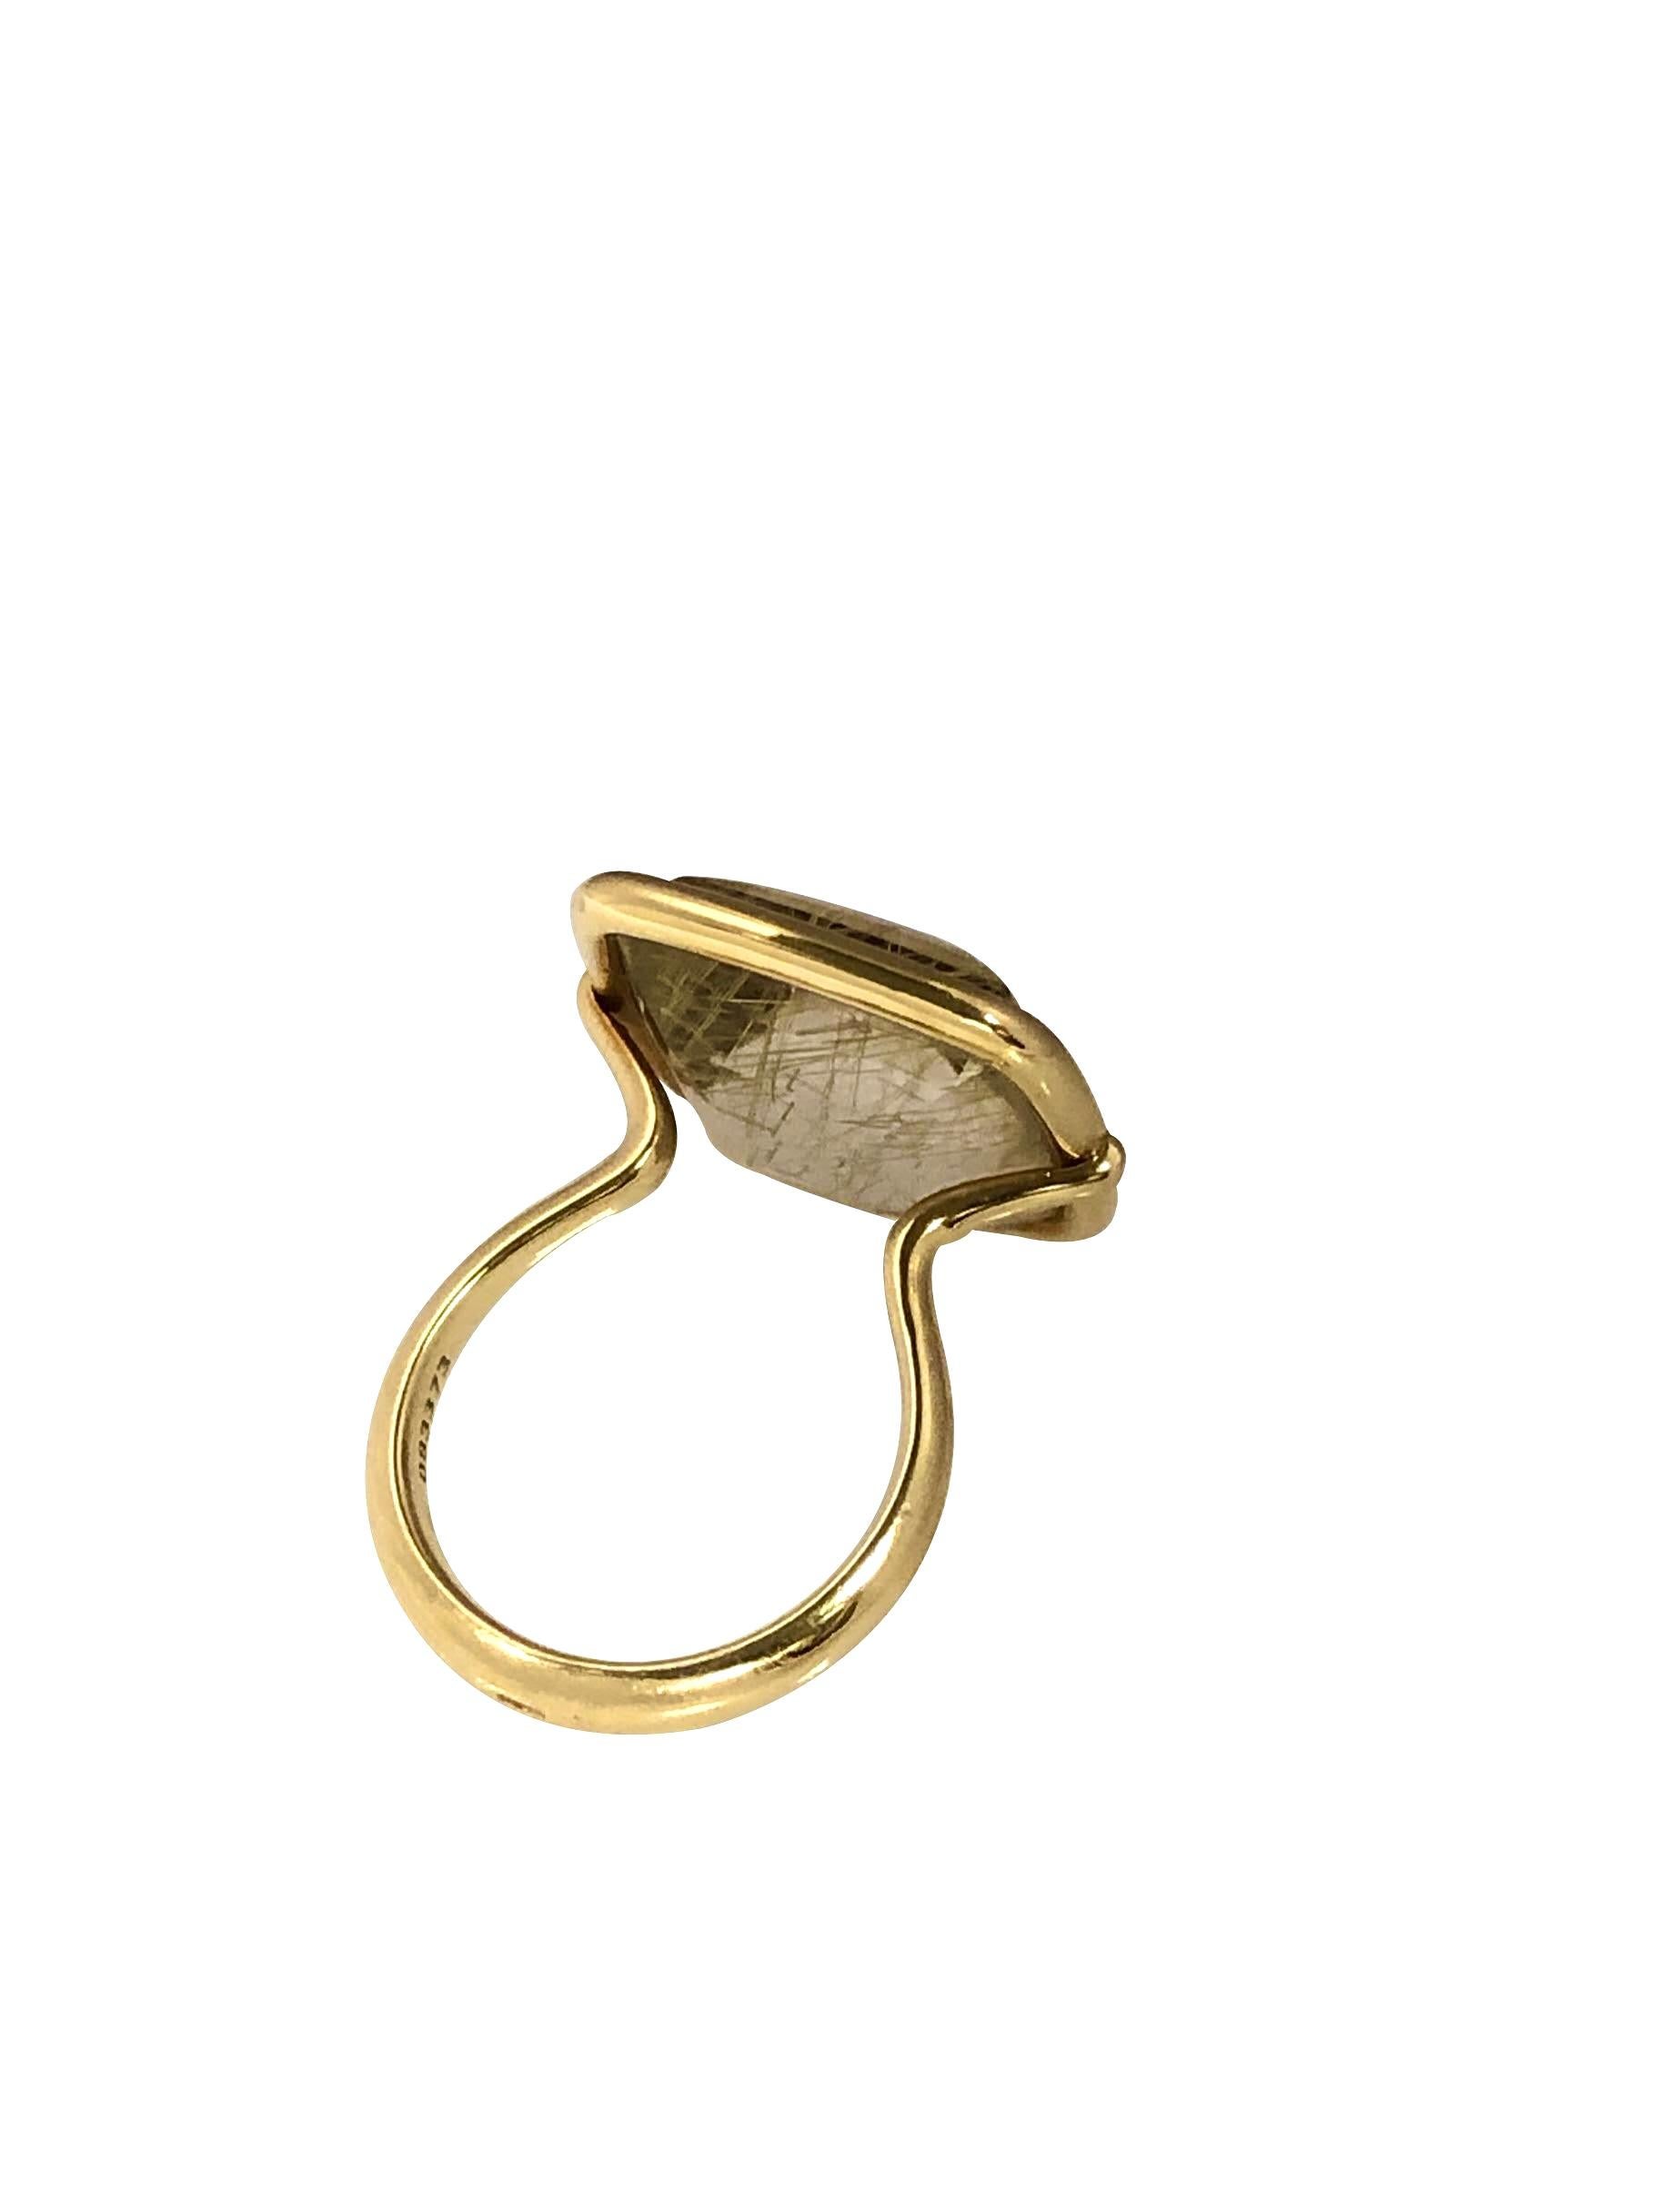 Circa 2010 Hermes 18K Yellow Gold Ring, set with a Cushion Sugar Loaf Domed Rutilated Quartz measuring 15 X 15 M.M. approximately 20 Carats, the top of the ring measures 3/4 X 3/4 inch and is uniquely attached to the shank so it can swivel back and